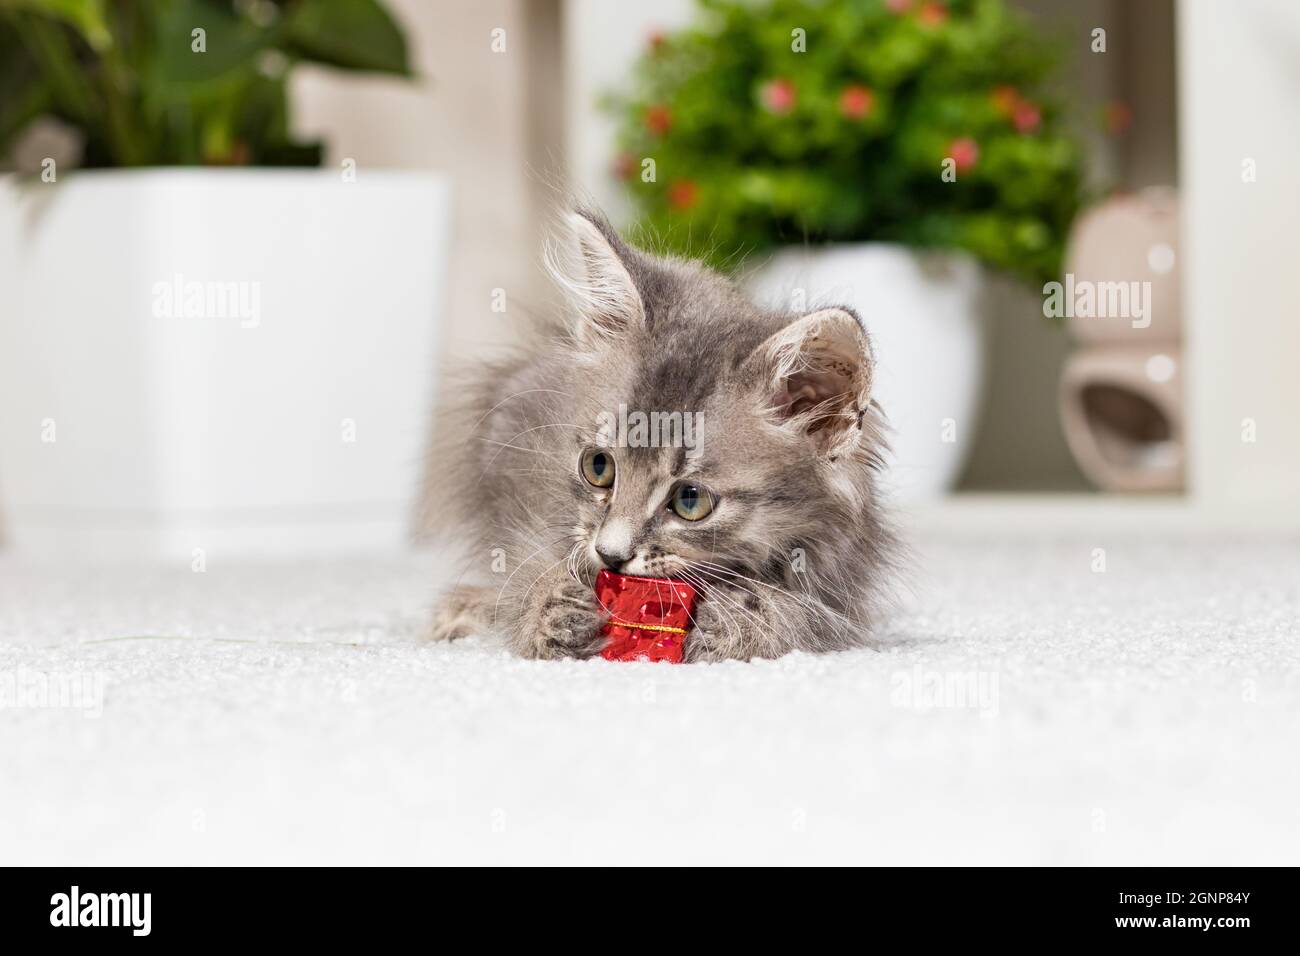 A fluffy gray kitten plays with a gift box on a gray background at home. Toys and goods for animals, pet shop. Stock Photo